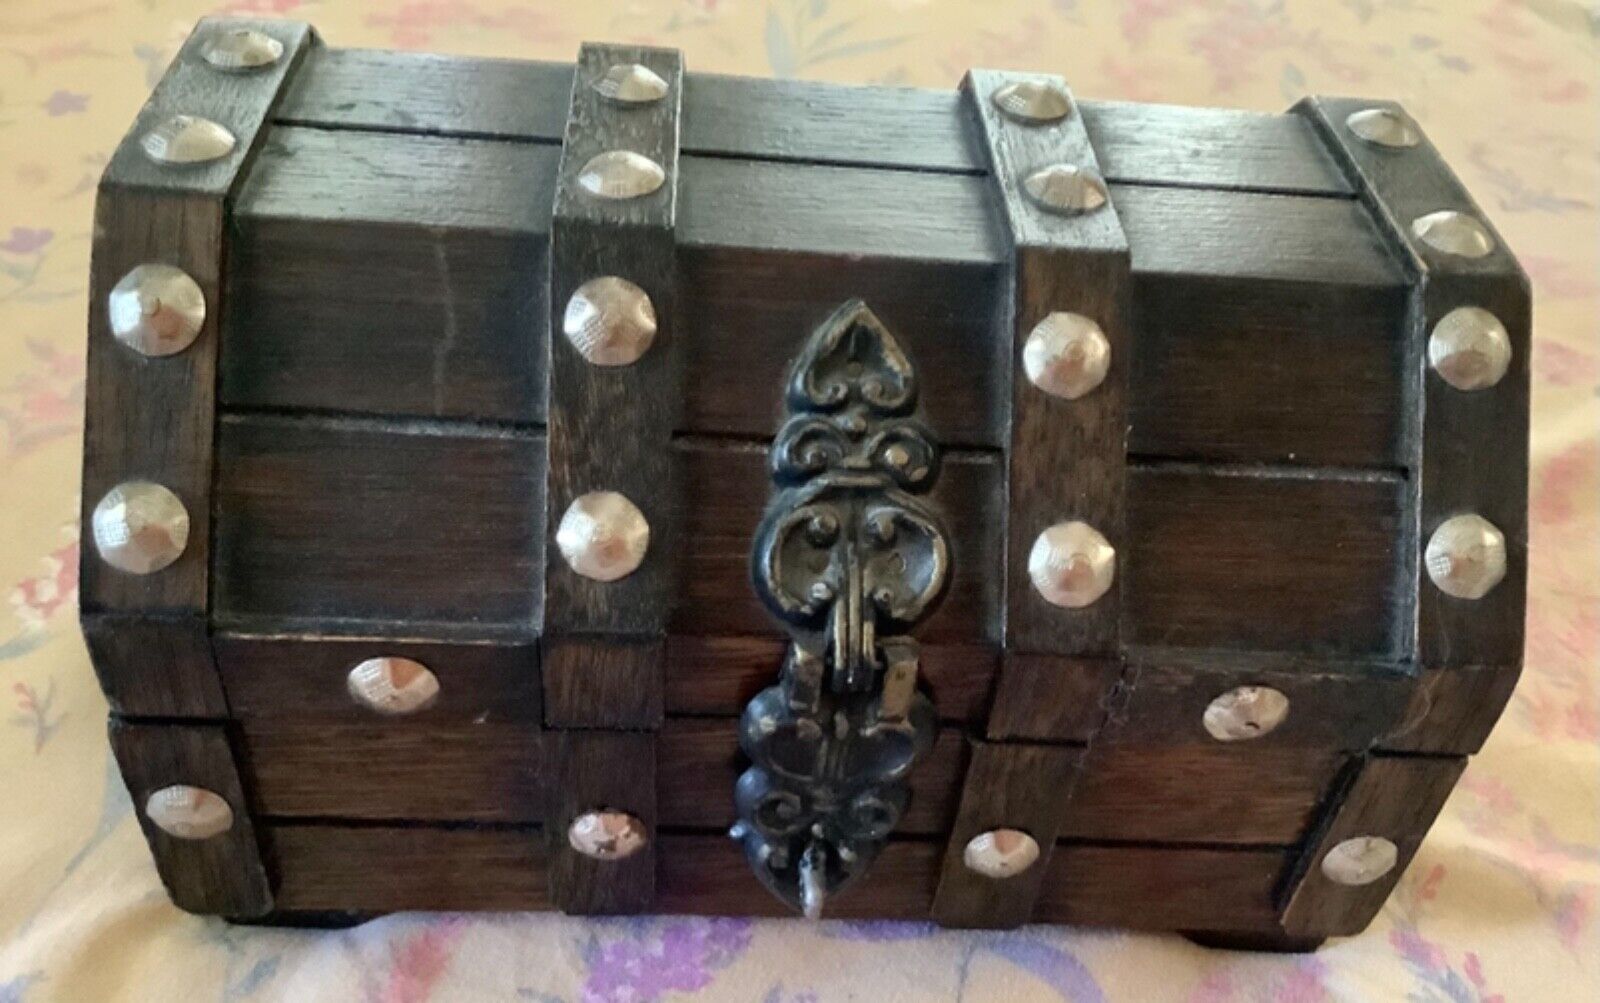 VINTAGE MCM PIRATE TREASURE CHEST WOODEN wood JEWELRY BOX GOTHIC mid Century